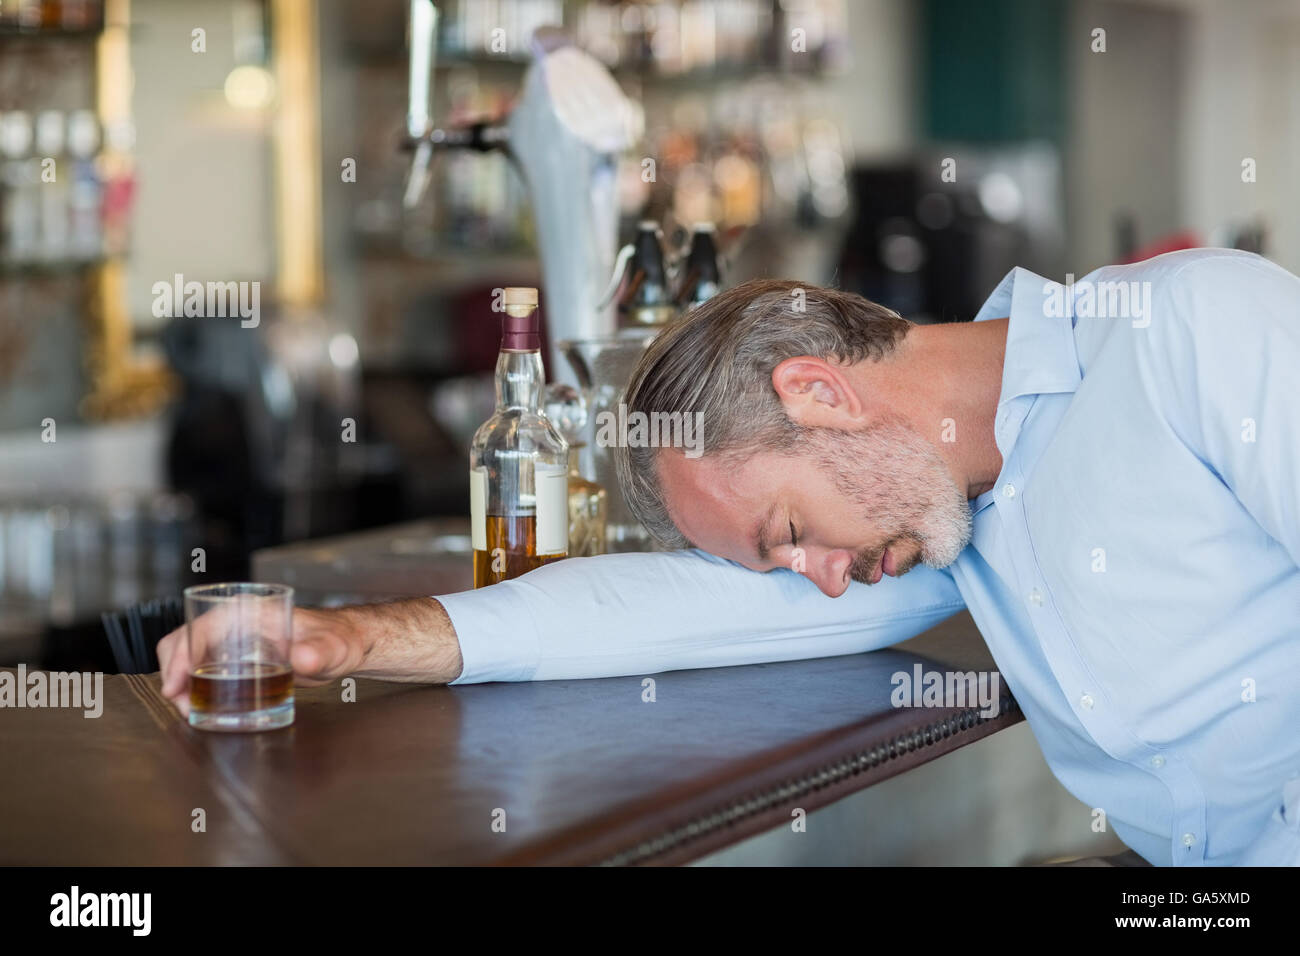 Happy Man Holding Drinking Glasses In The Kitchen High-Res Stock